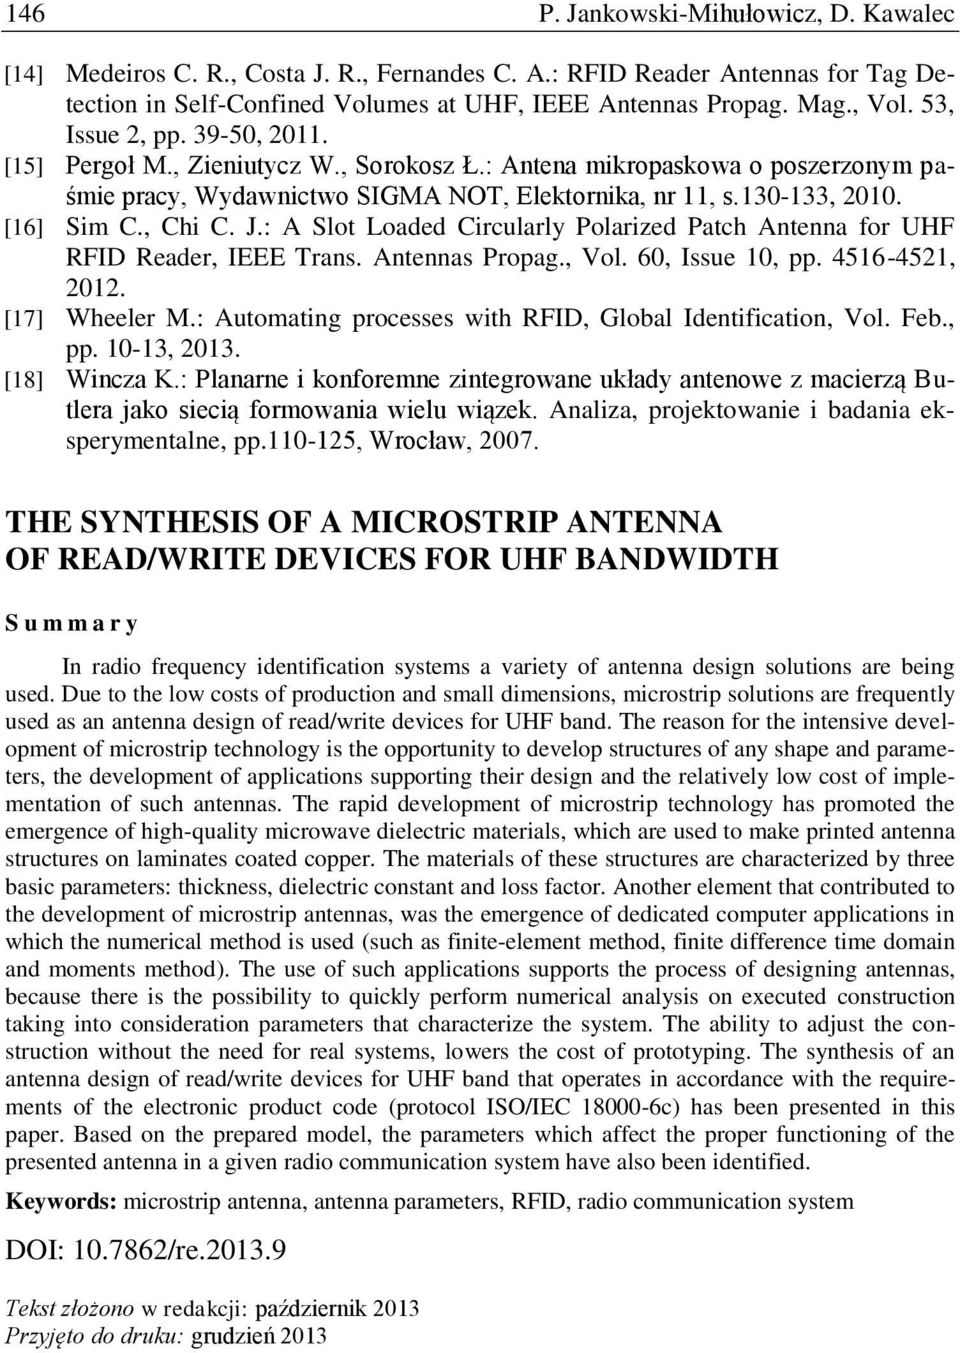 , Chi C. J.: A Slot Loaded Circularly Polarized Patch Antenna for UHF RFID Reader, IEEE Trans. Antennas Propag., Vol. 60, Issue 10, pp. 4516-4521, 2012. [17] Wheeler M.